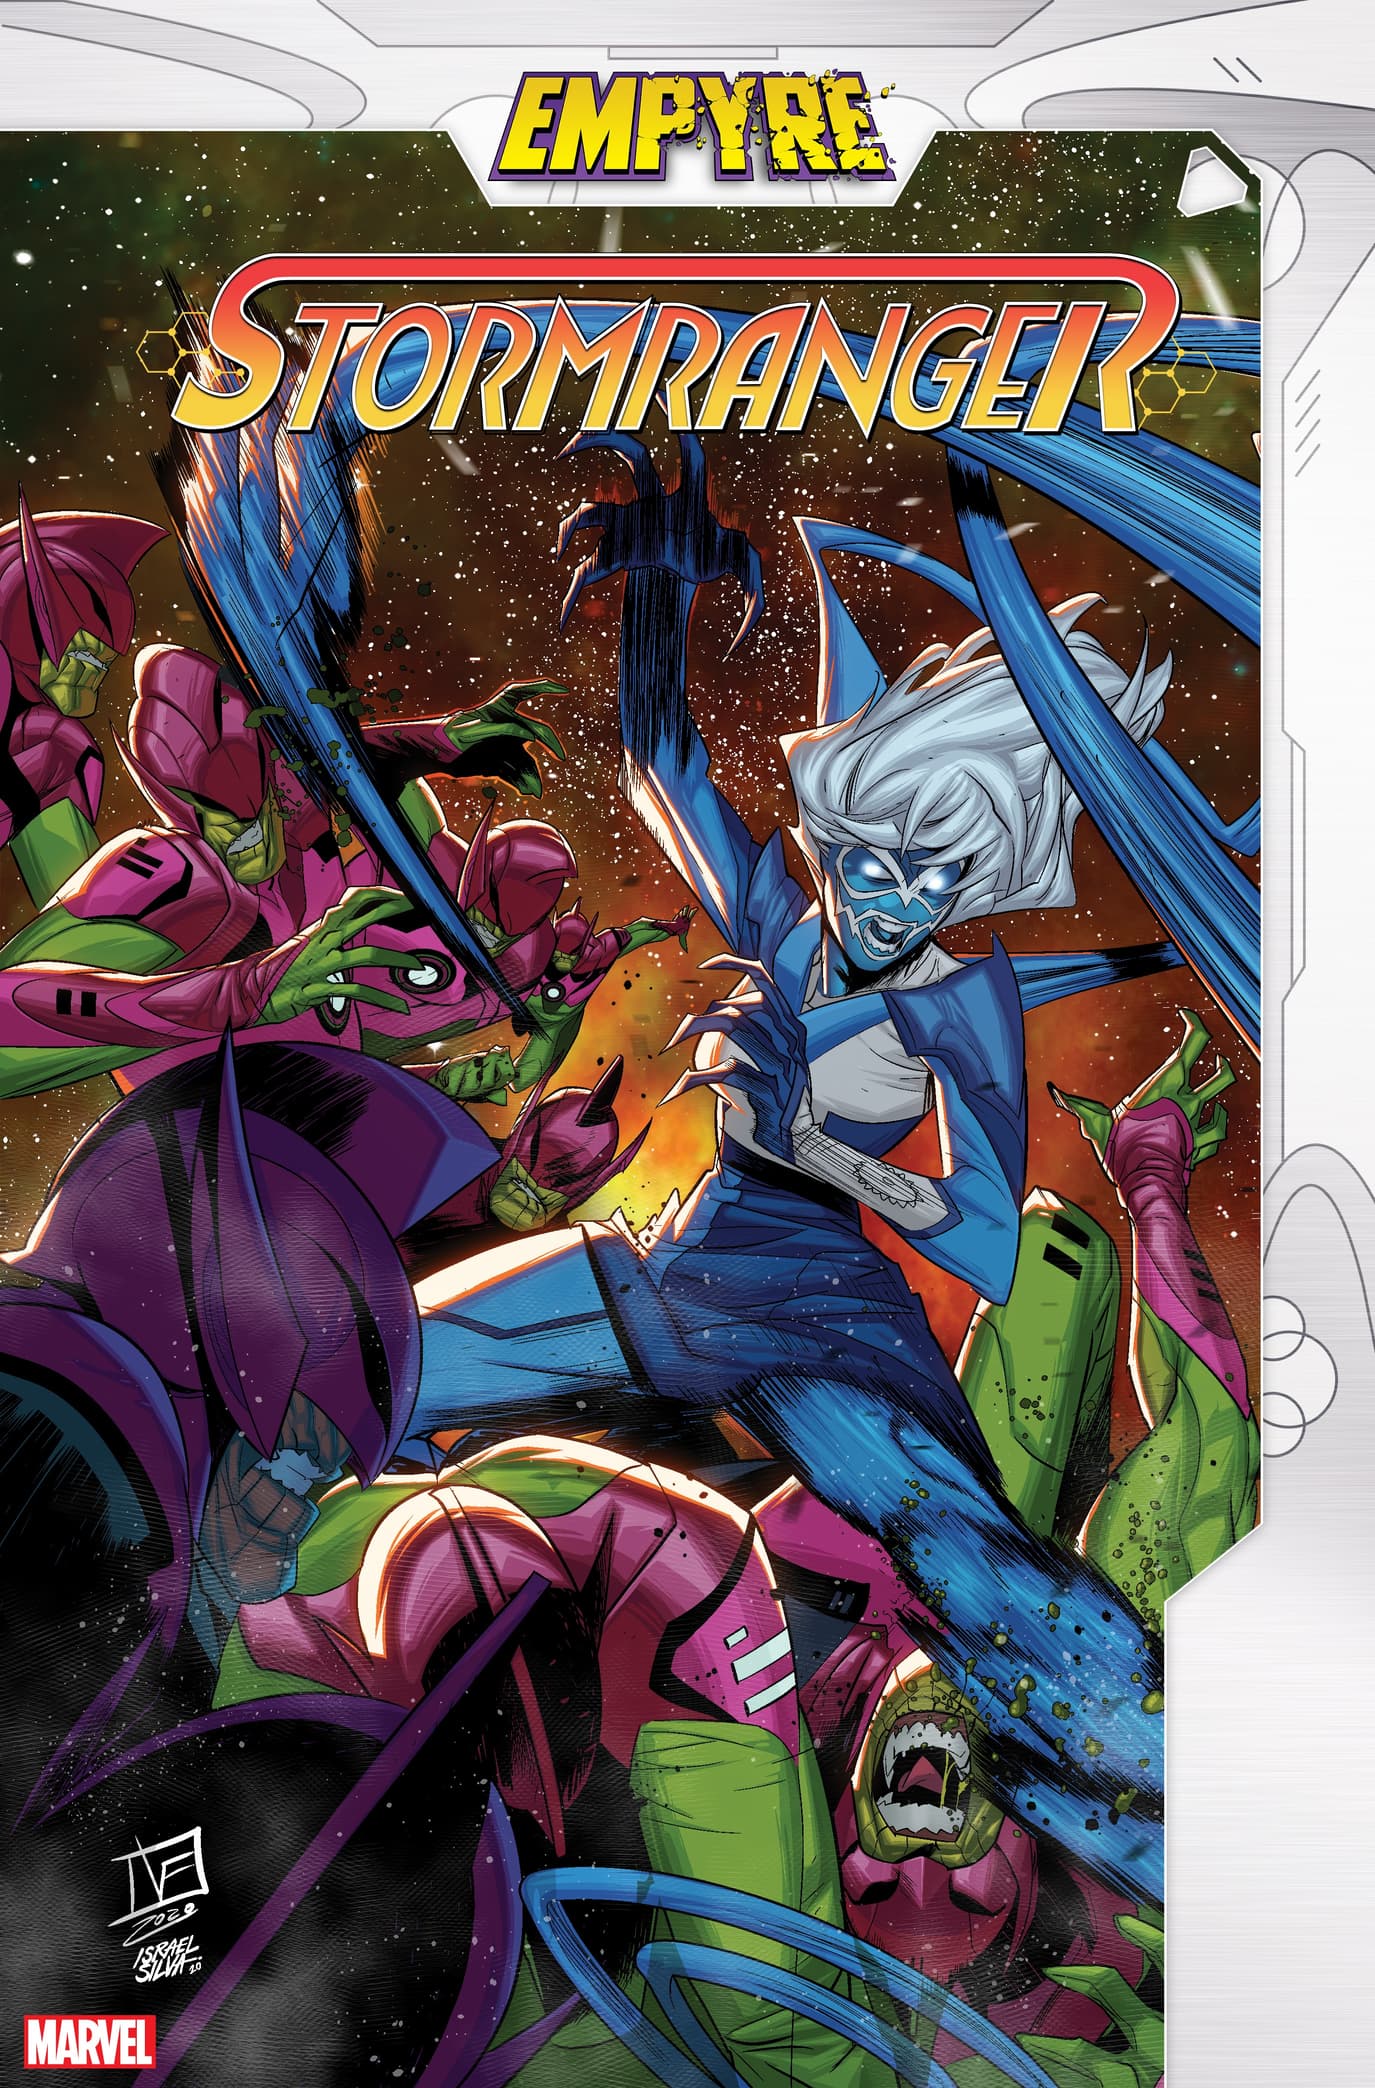 Empyre: Stormranger #1 (of 3) written by SALADIN AHMED with Art by STEVEN CUMMINGS and cover by FEDERICO VICENTINI 